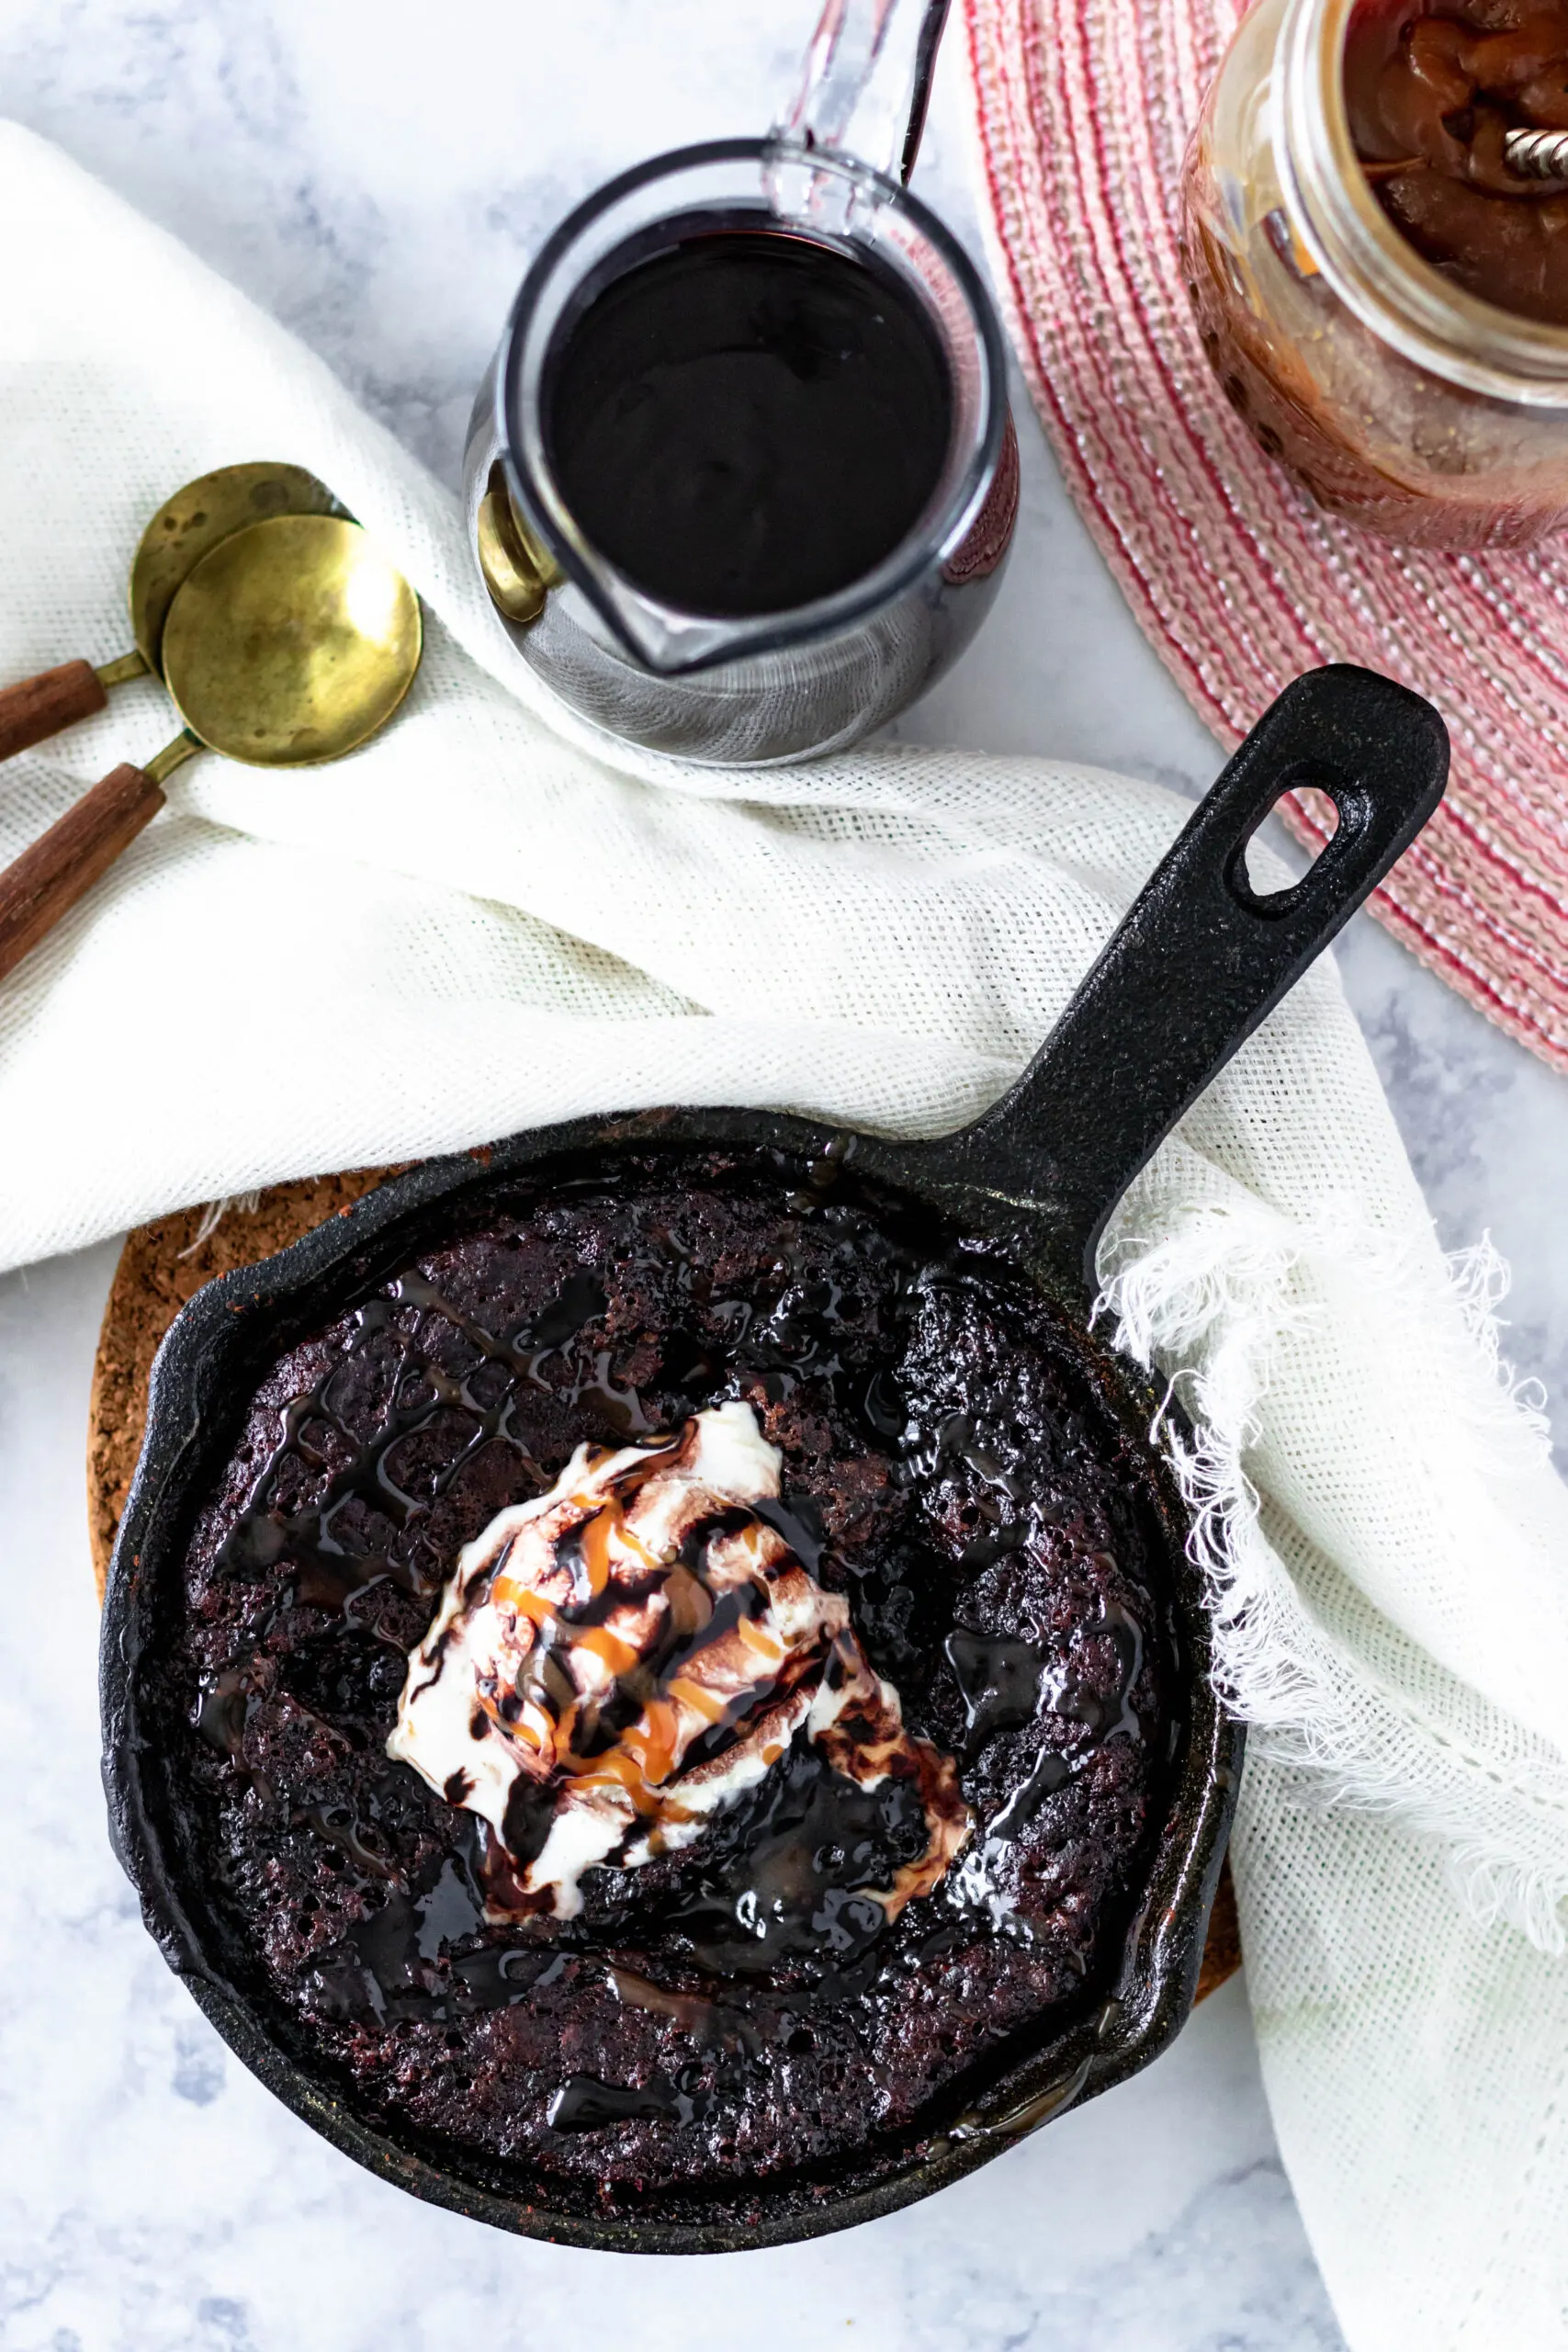 top view of the hot fudge cake accented with a napkin in the top left of the frame with gold and wooden spoons and a top view of the pitcher of chocolate syrup